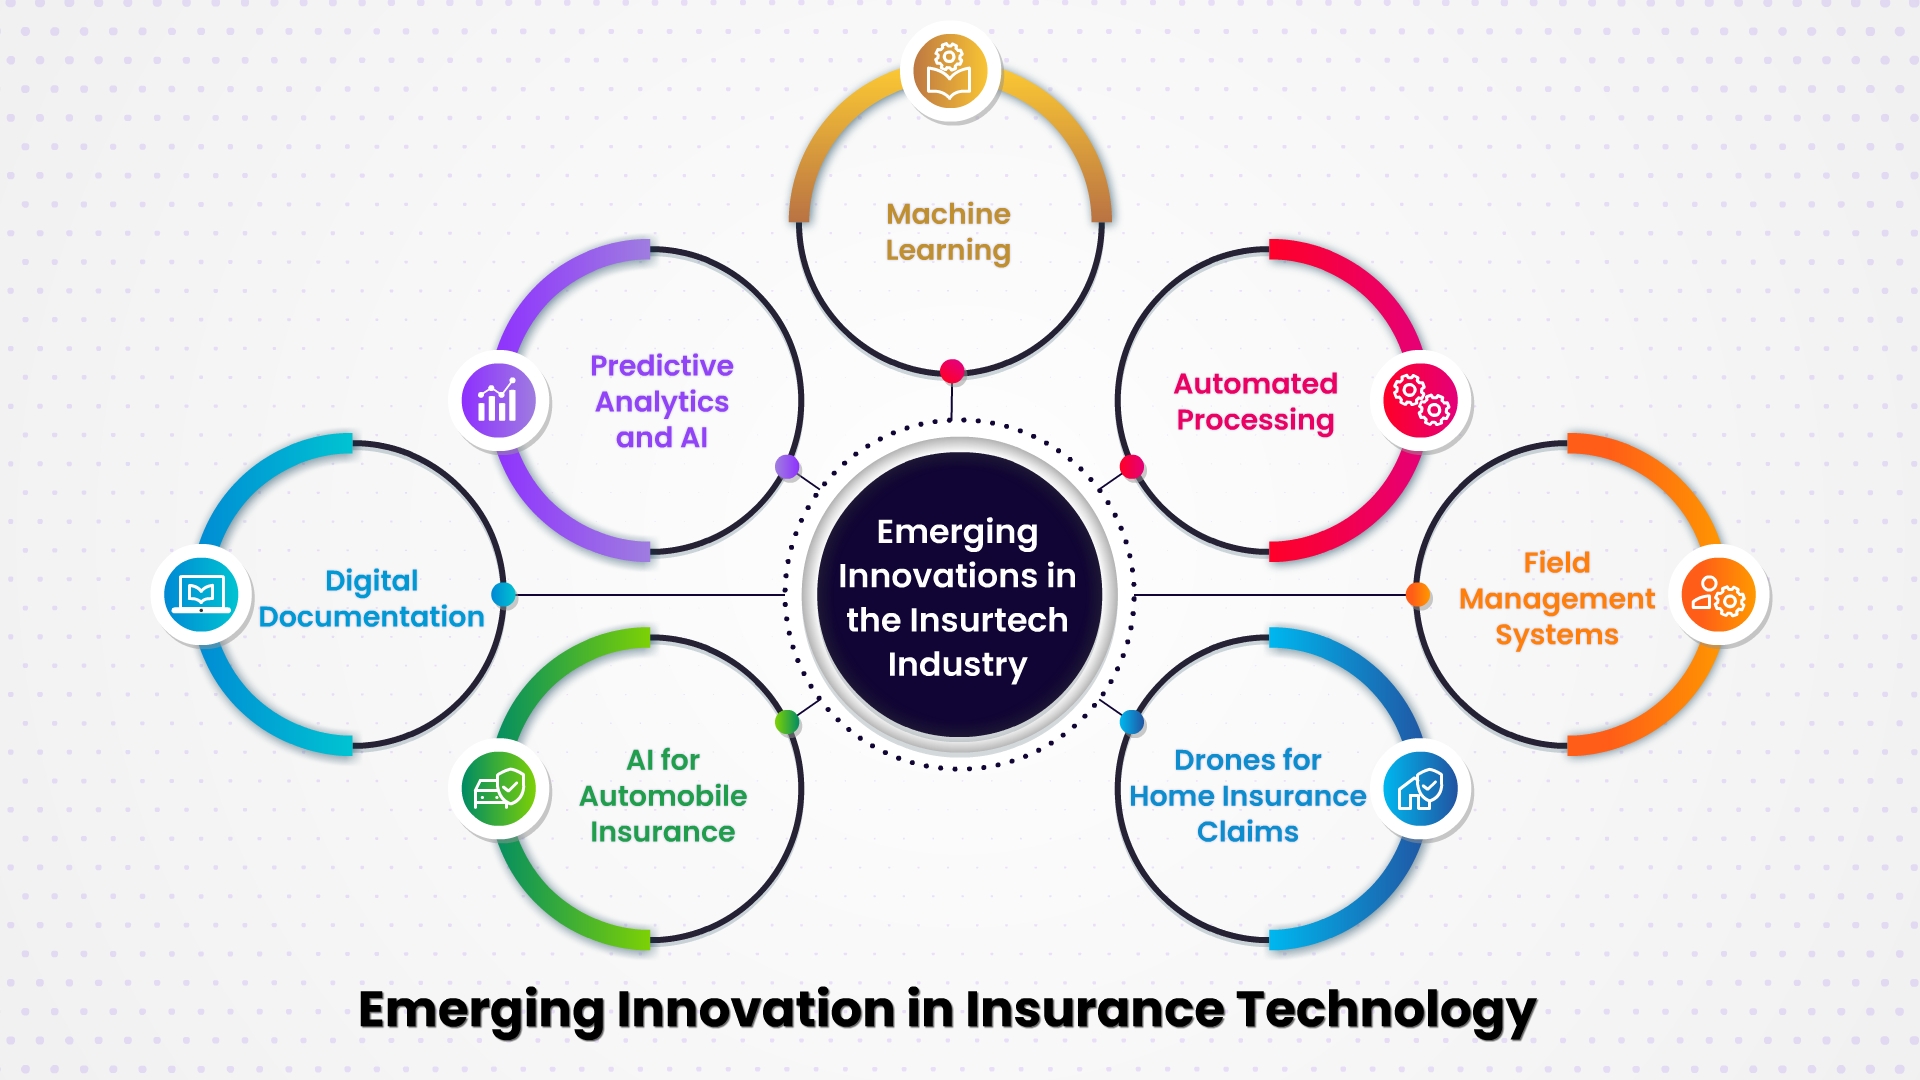 Emerging Innovations in Insurance Technology